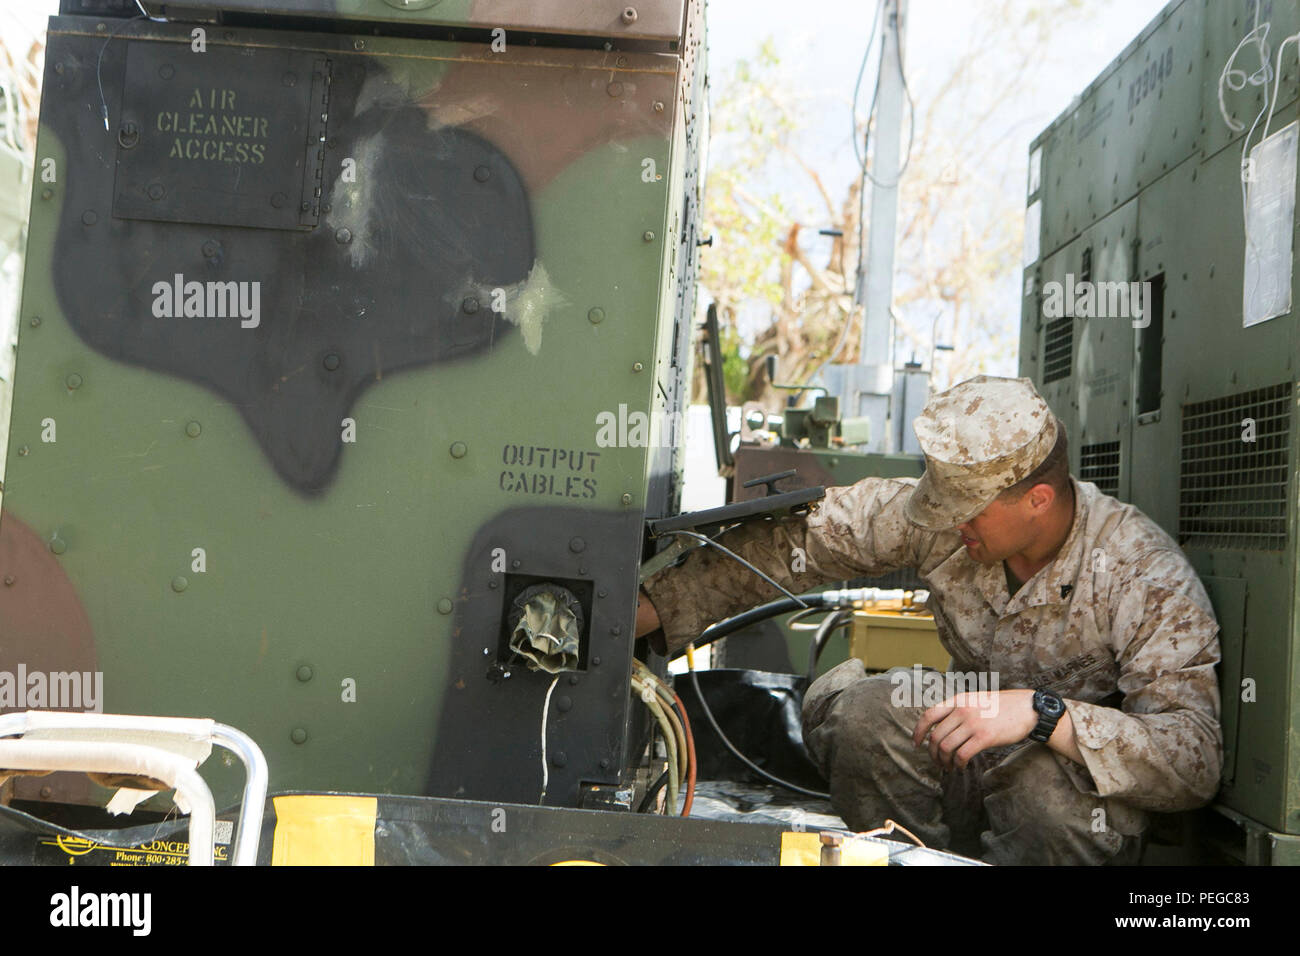 U.S. Marine Corps Cpl. Colton Santic, with Combat Logistics Battalion 31, 31st Marine Expeditionary Unit, works on a MEP 806 Generator while Marines distribute water to local civilians as part of typhoon relief efforts in Saipan, Aug. 11, 2015. The 31st MEU and the ships of the Bonhomme Richard Amphibious Ready Group are assisting the Federal Emergency Management Agency with distributing emergency relief supplies to Saipan after the island was struck by Typhoon Soudelor, Aug. 2-3. (U.S. Marine Corps photo by Lance Cpl. Brian Bekkala/Released.) Stock Photo